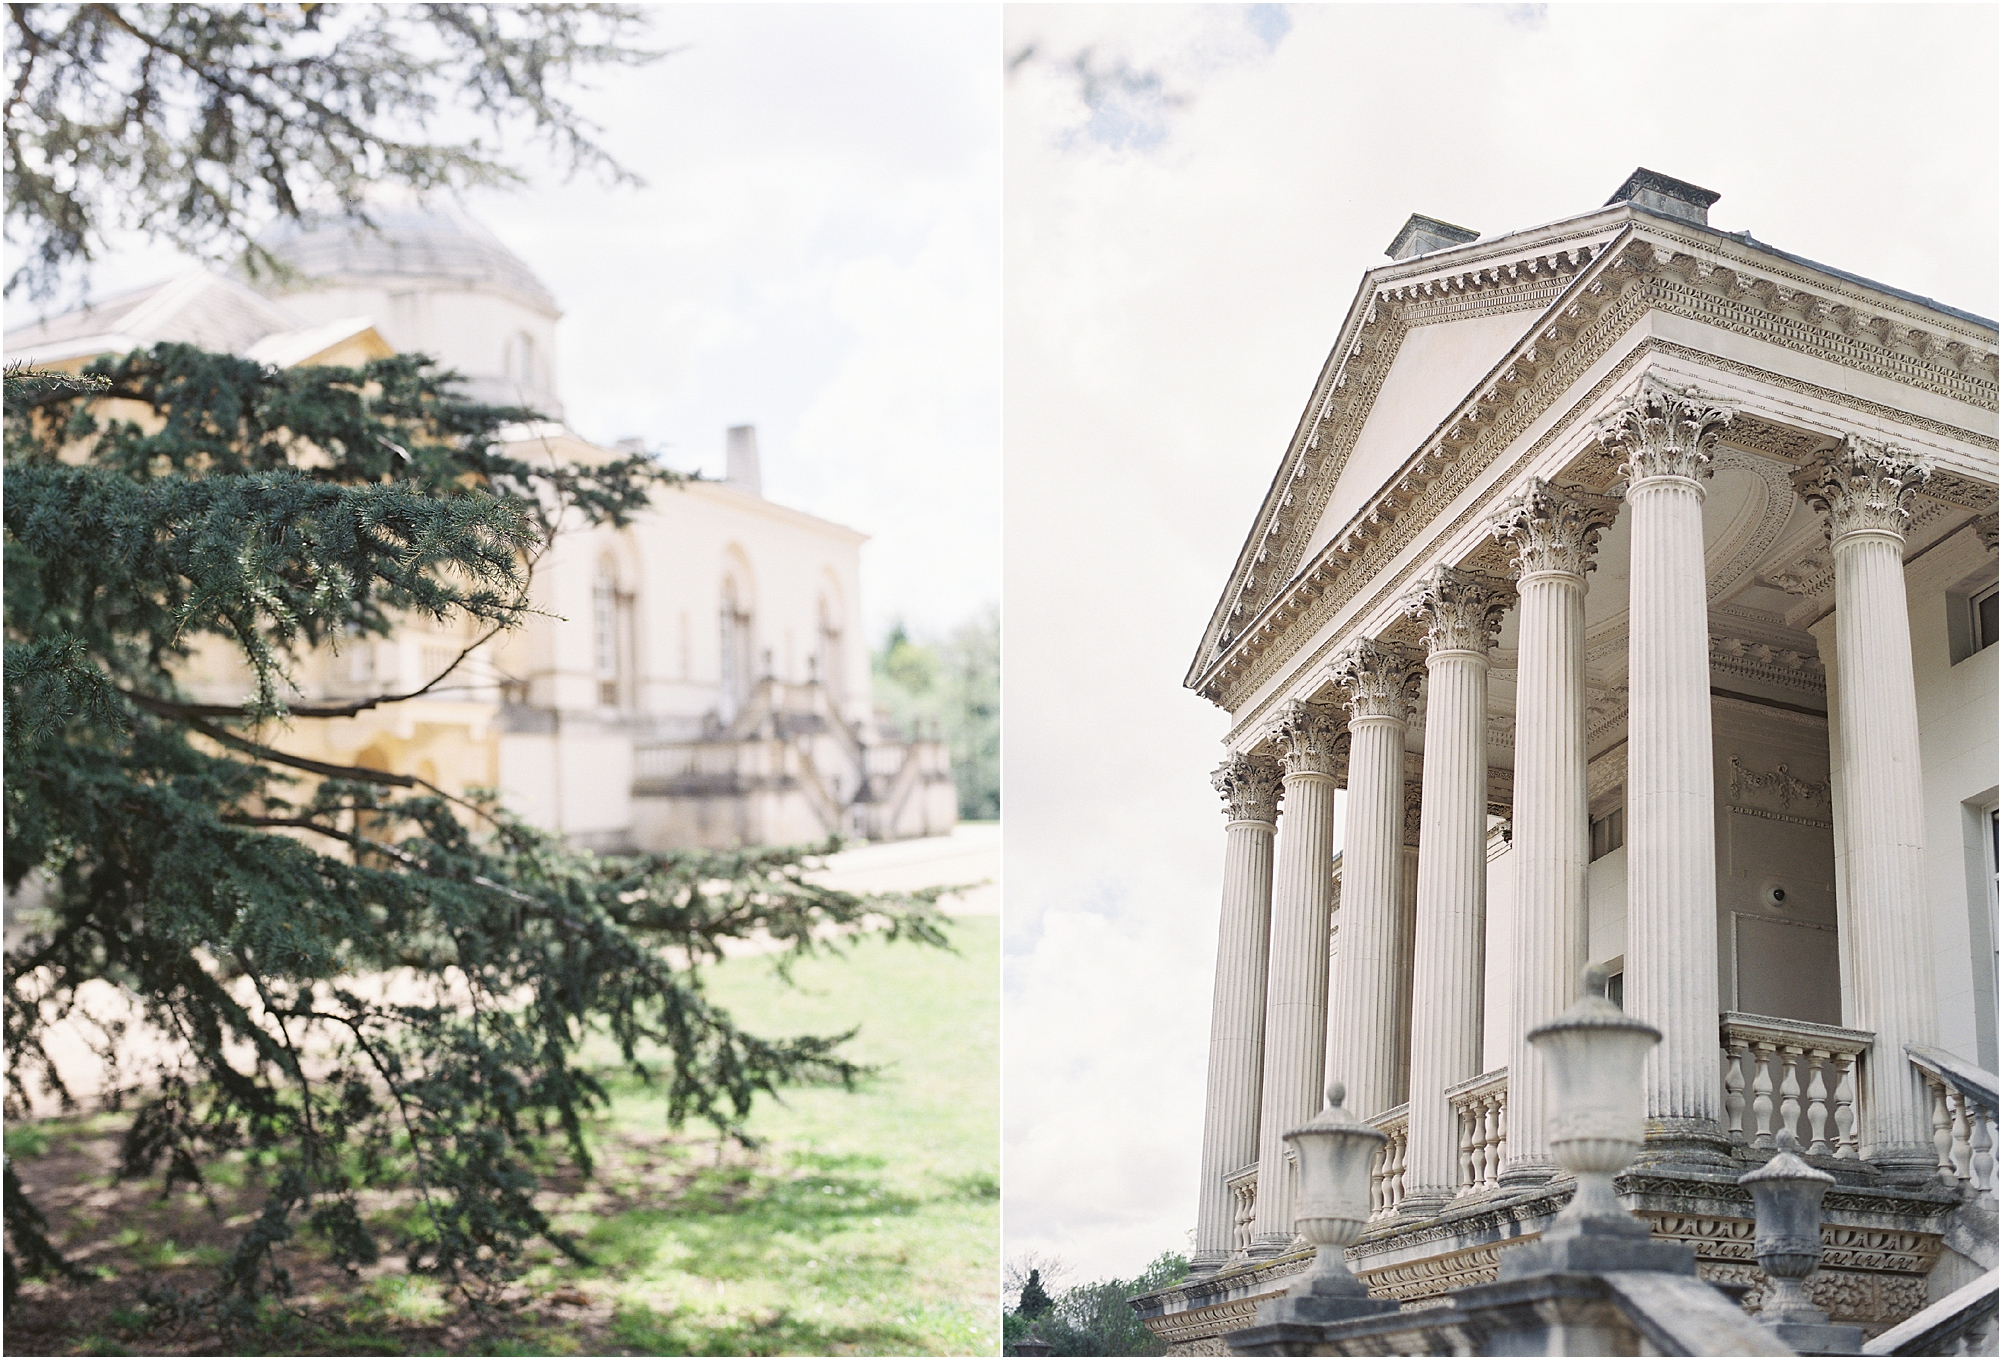 Chiswick House with pine trees outside